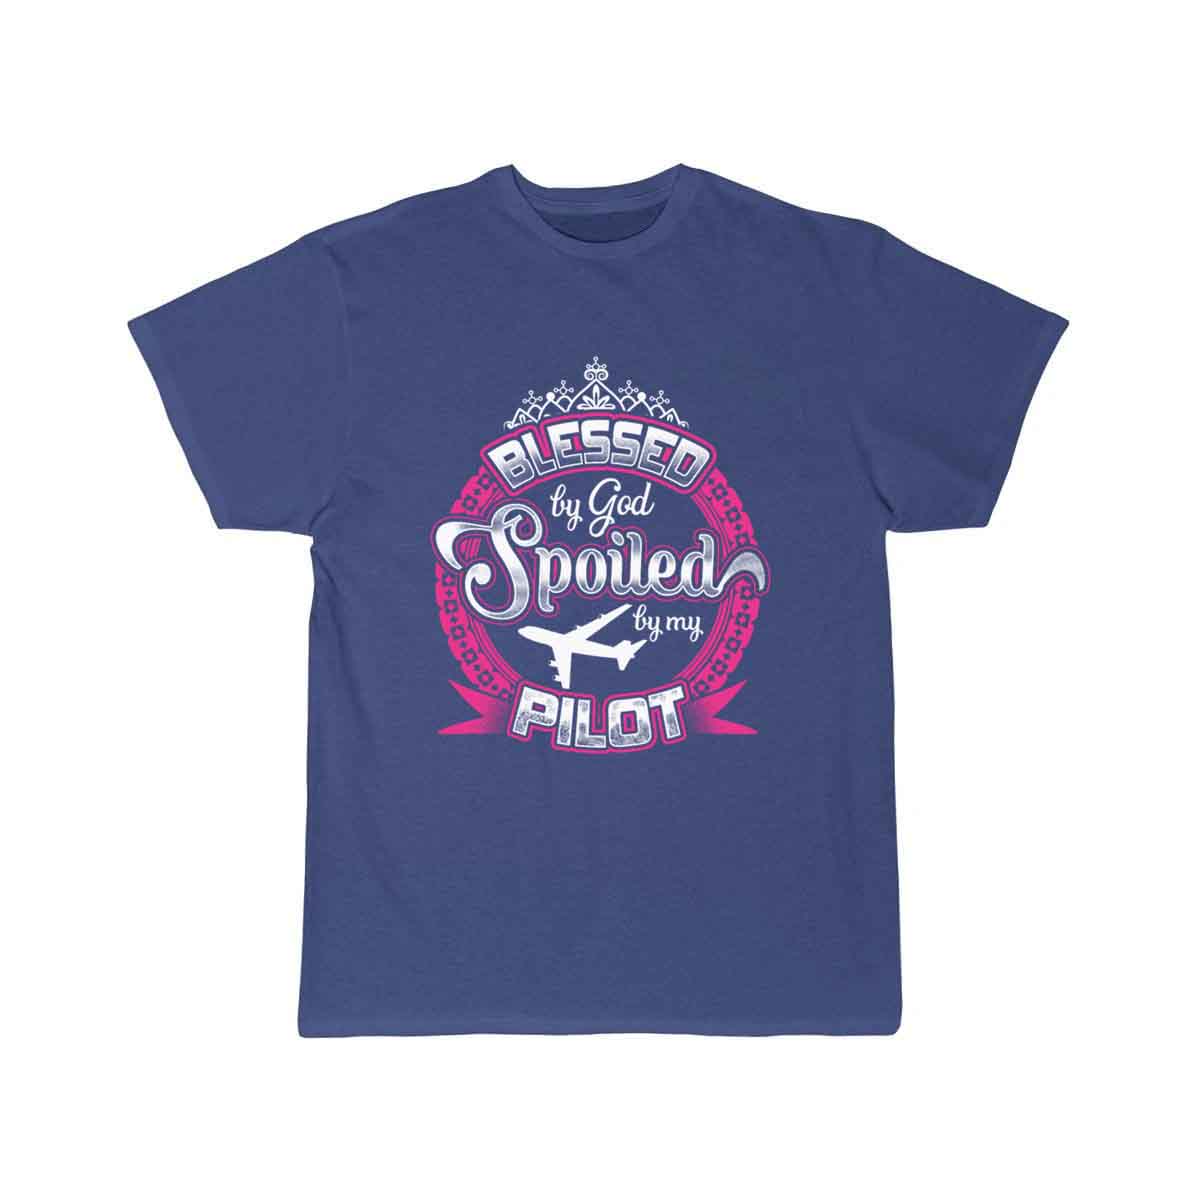 Pilot - Blessed by god and spoiled by my pilot T-SHIRT THE AV8R